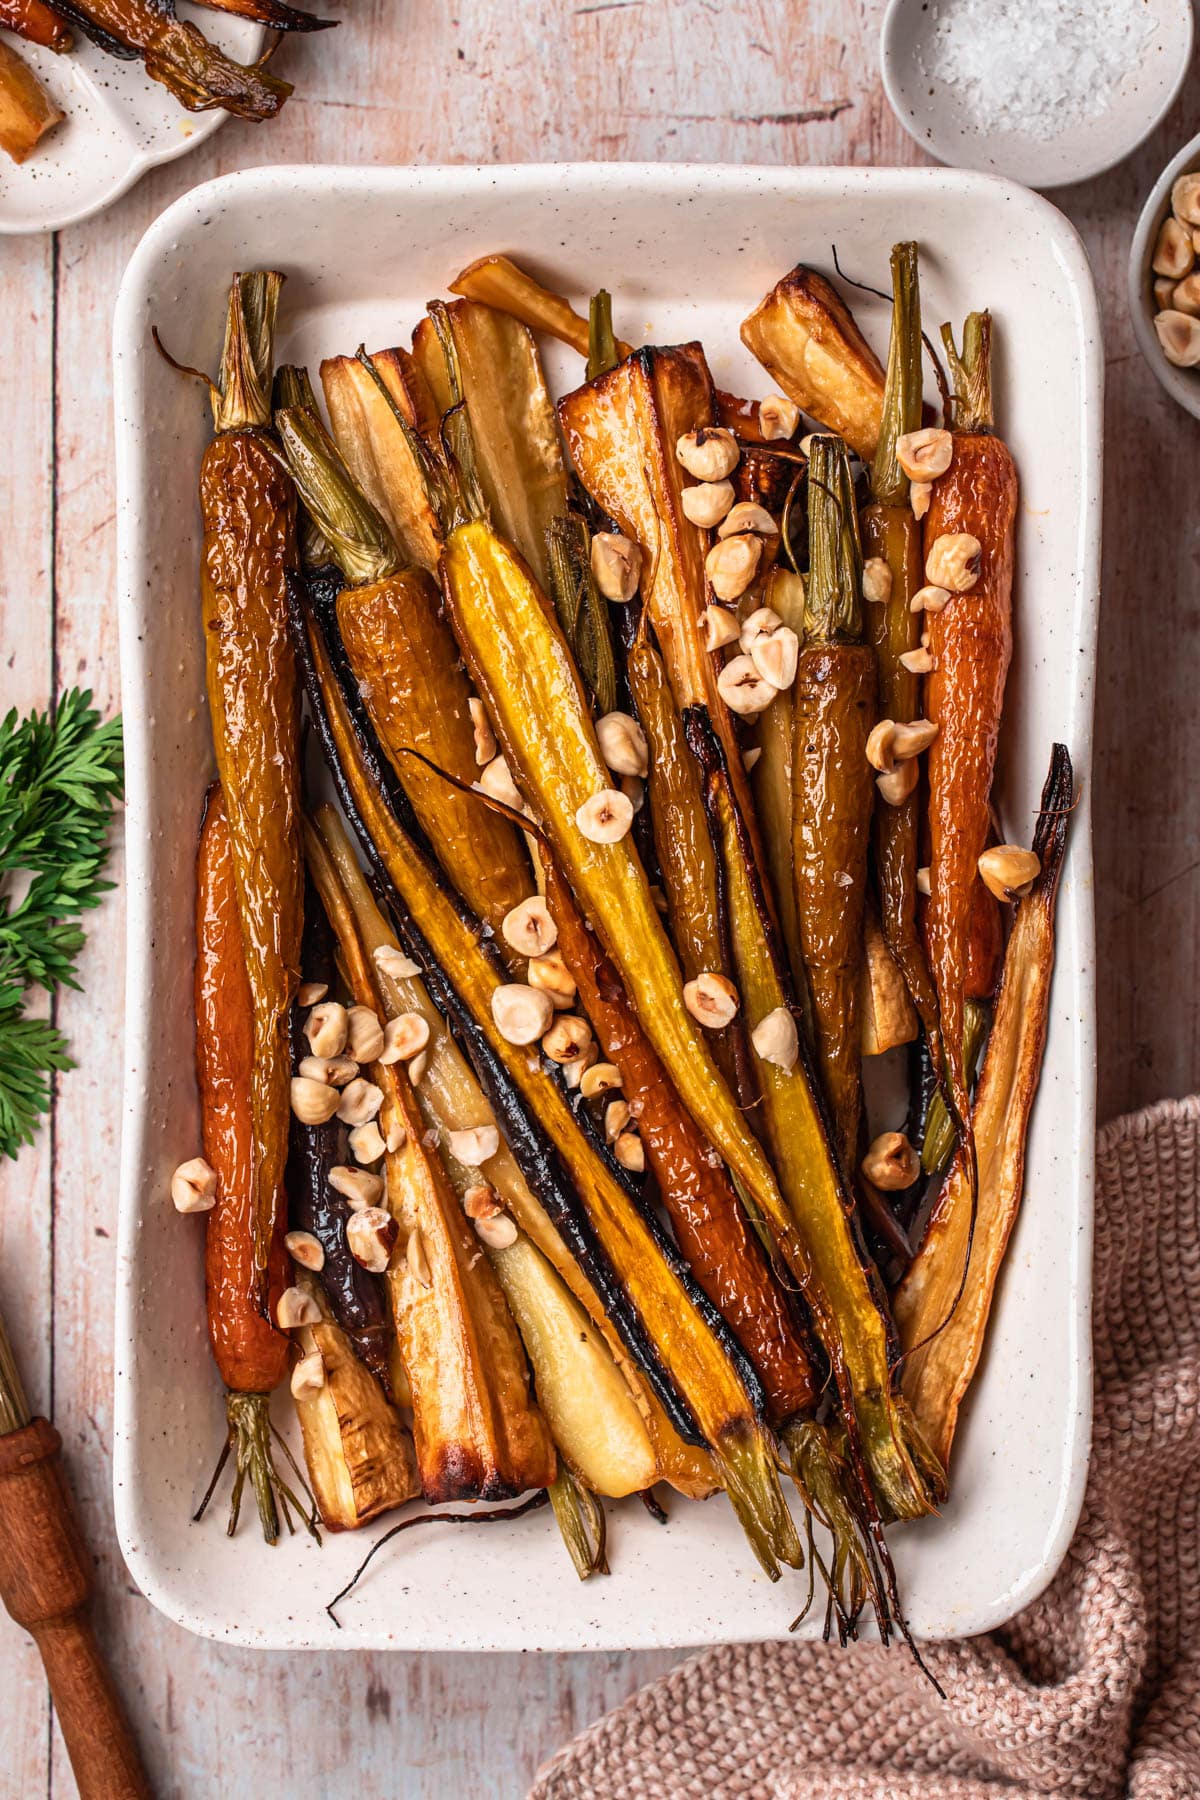 Honey roasted parsnips and carrots in a white serving dish.